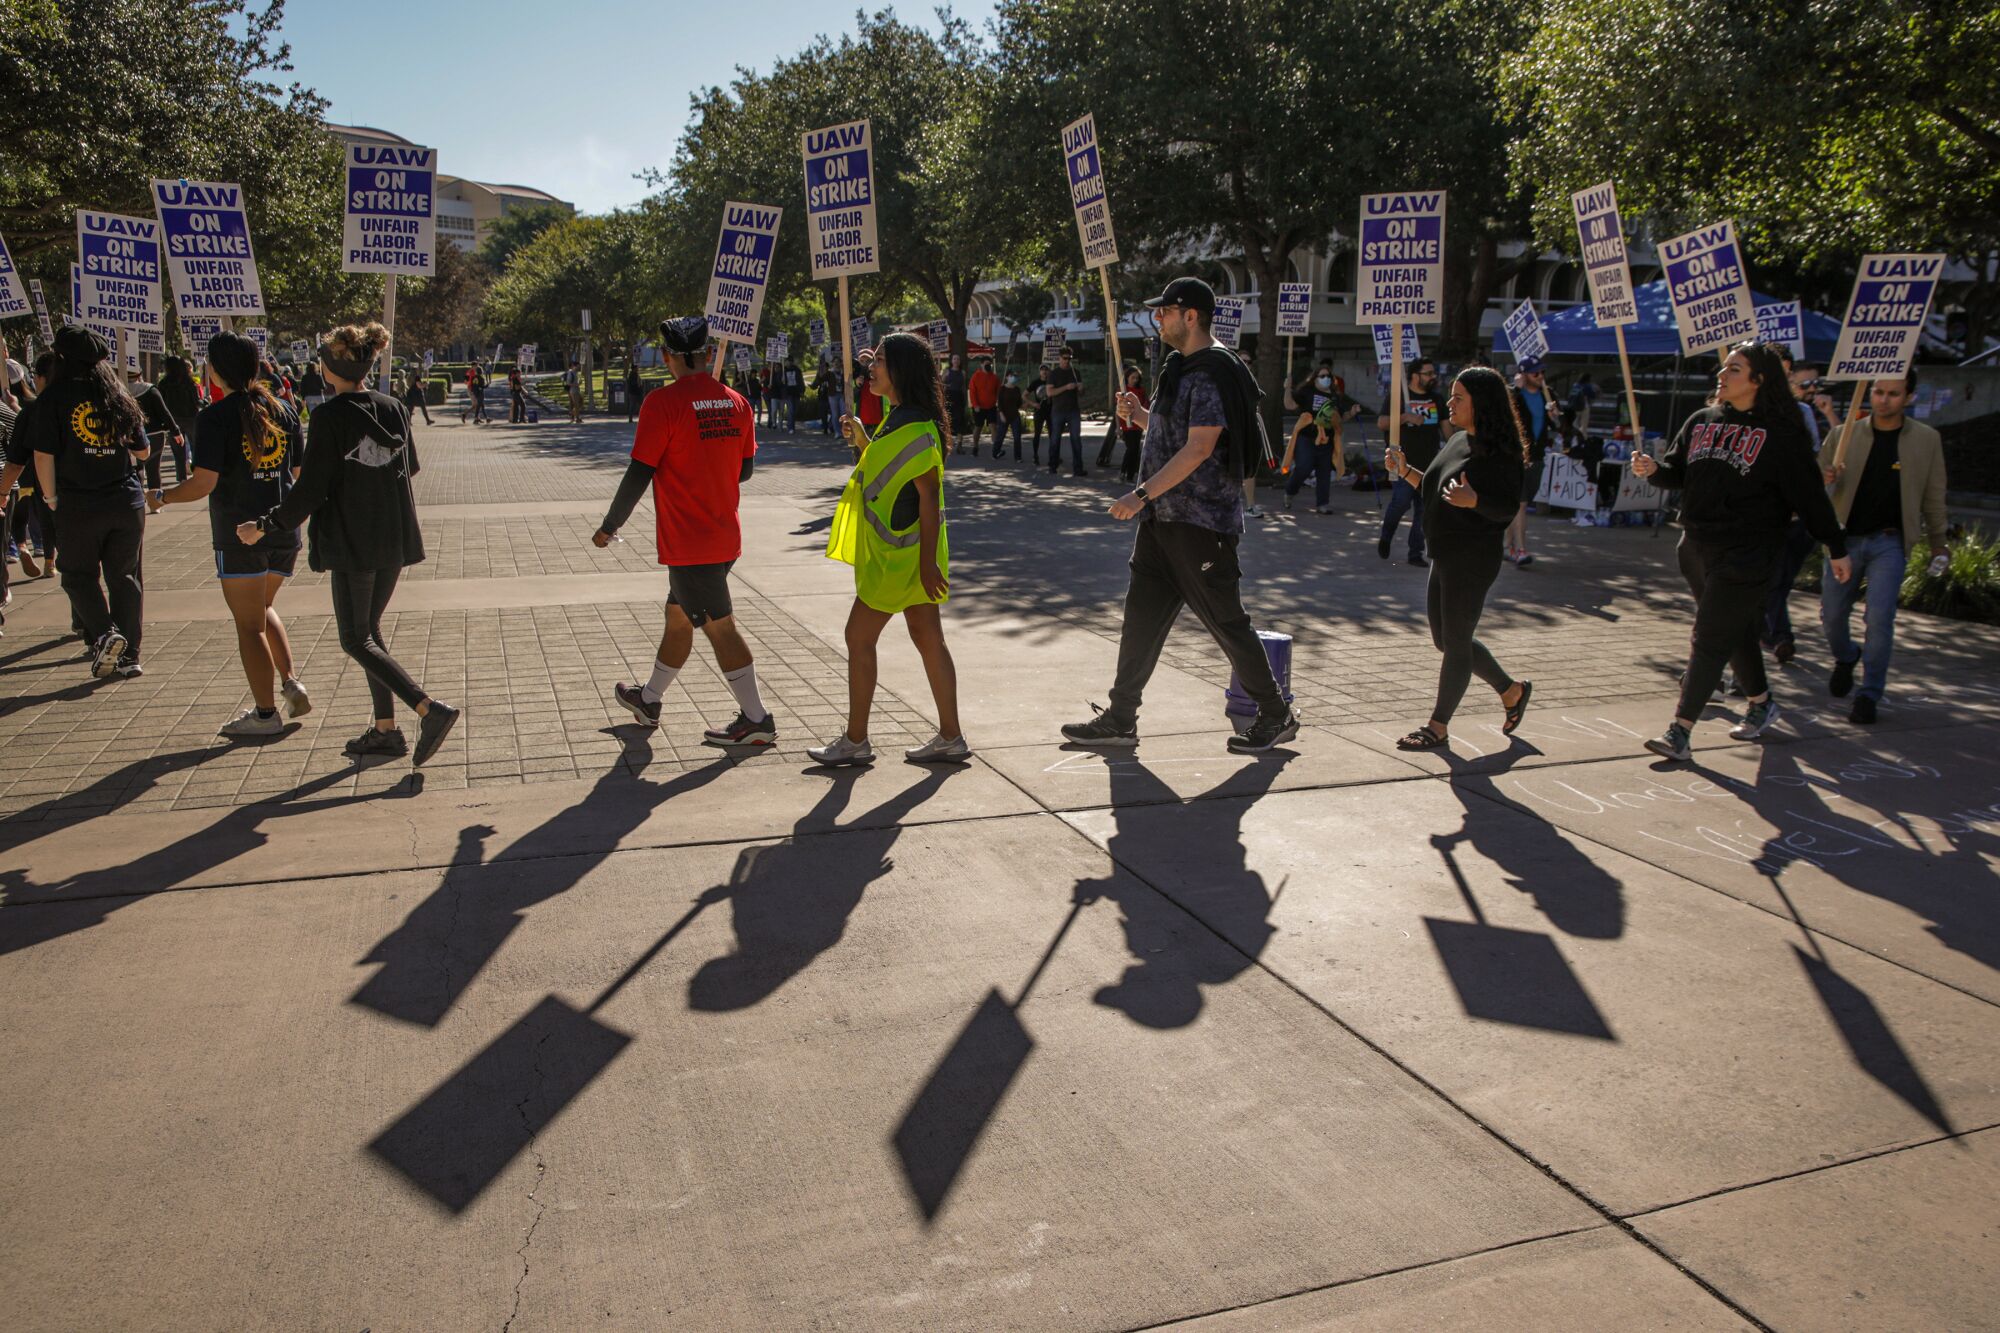 A group of demonstrators hold signs and walk in a large circle while they picket at University of California Irvine.